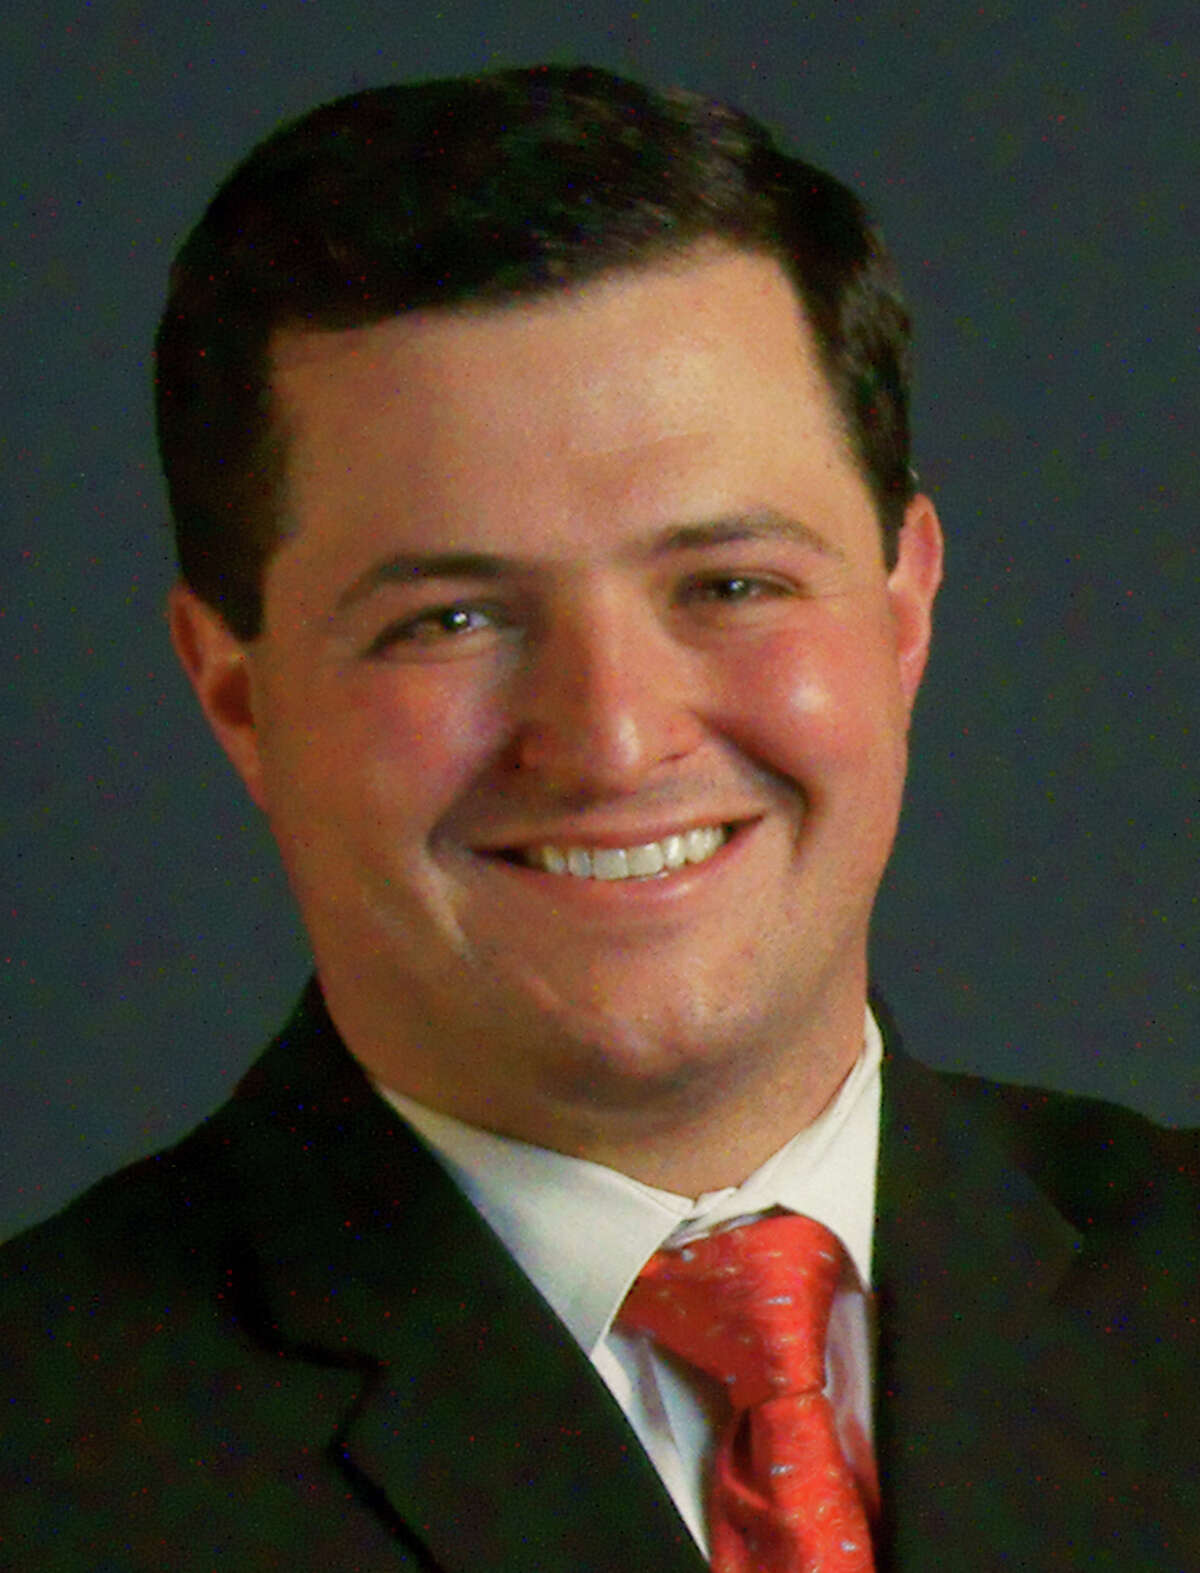 Trumbull First Selectman Timothy Herbst, Republican candidate for State Treasurere